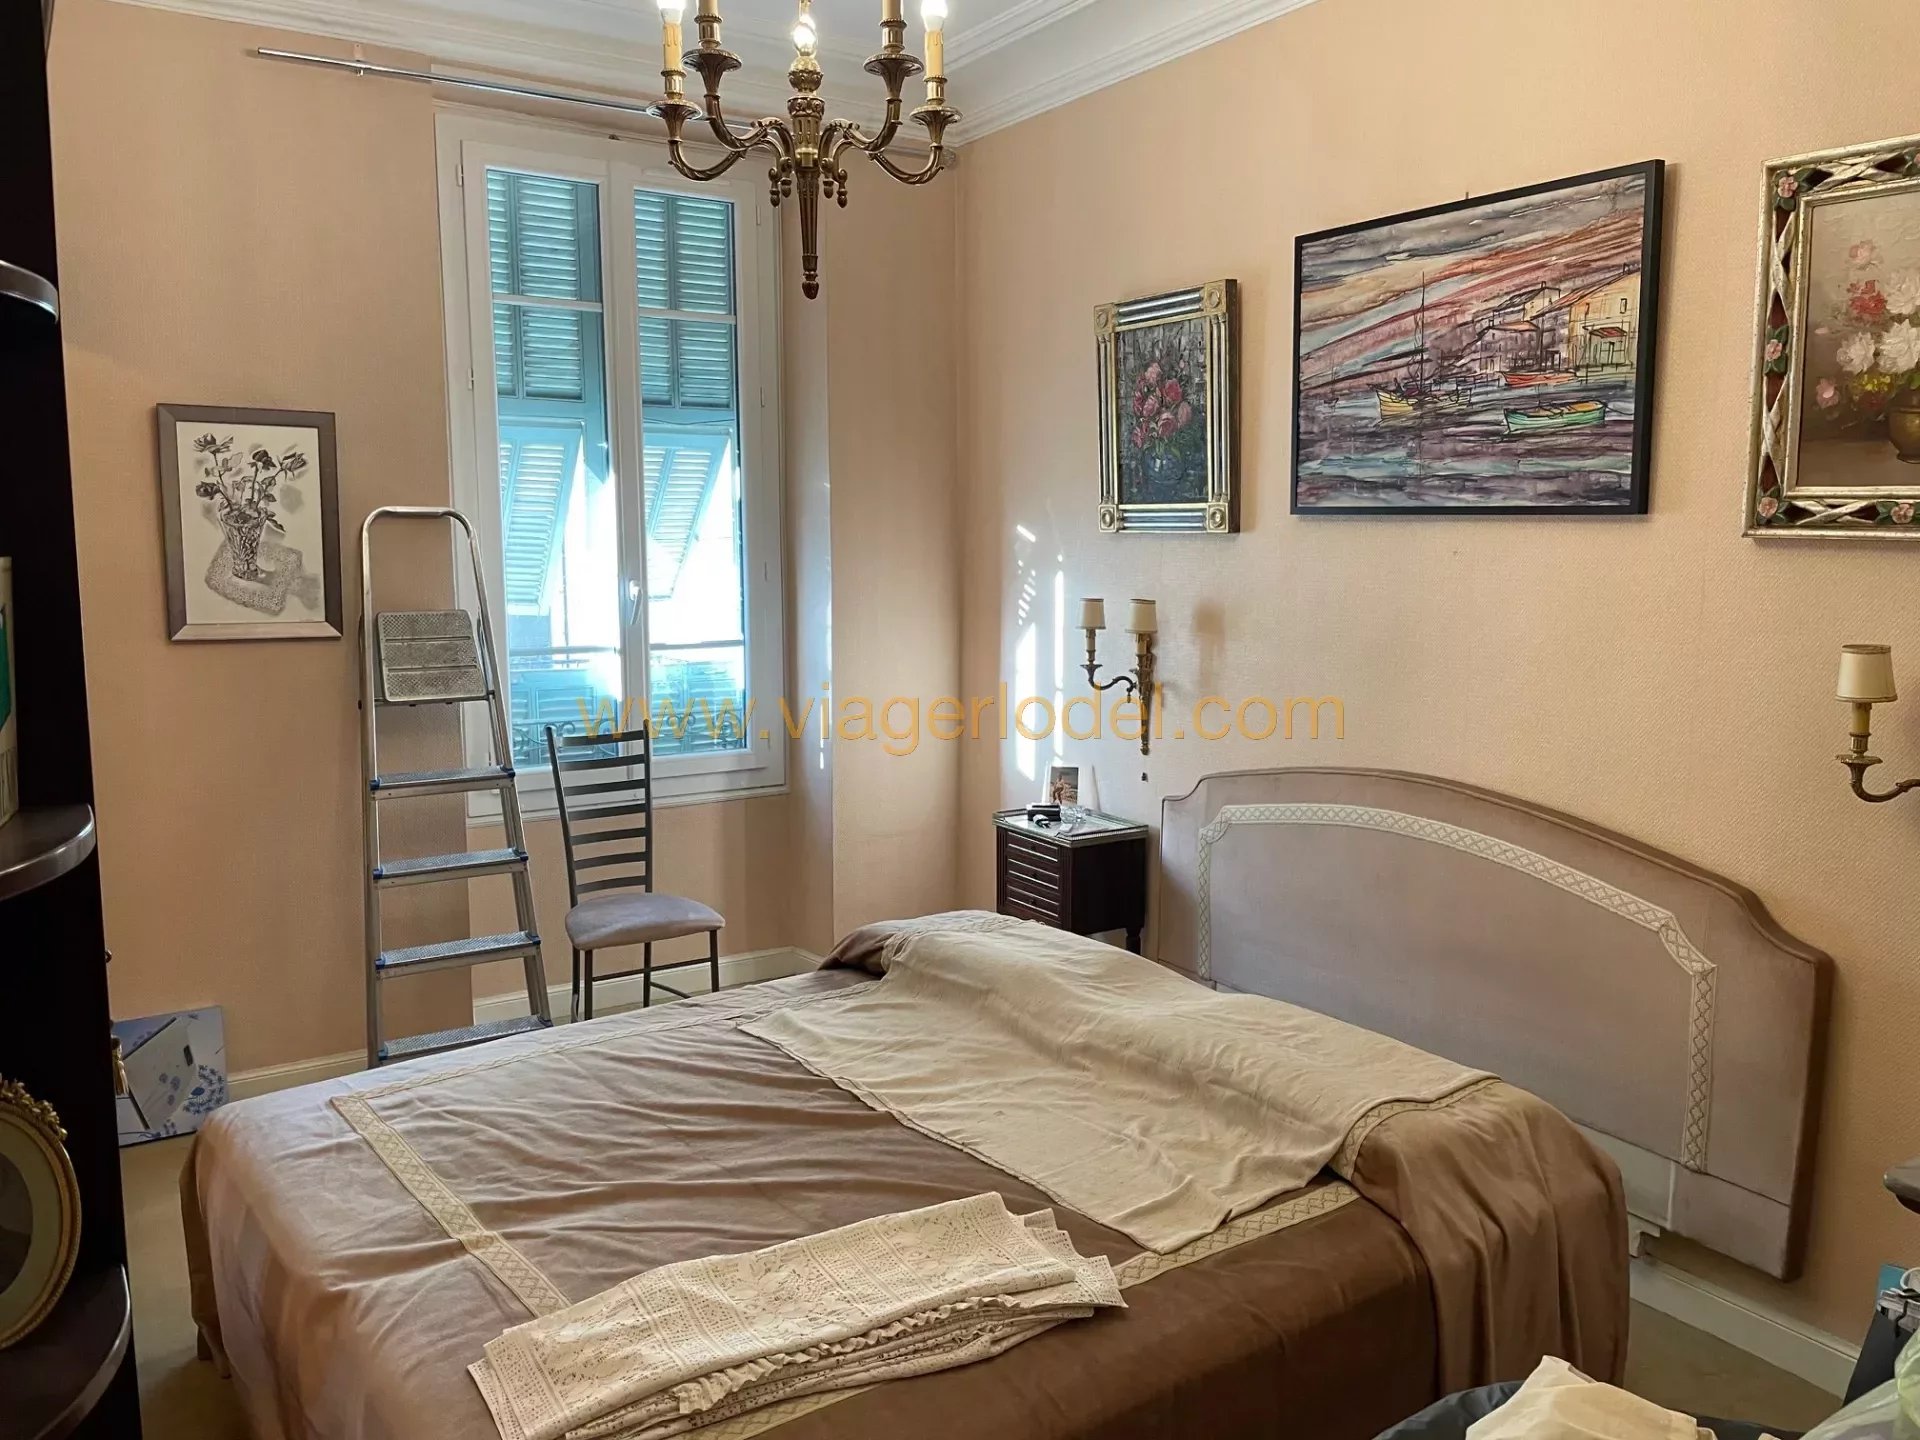 Ref. 9303 - LIFE ANNUITY - NICE (06) Occupied 2-room flat